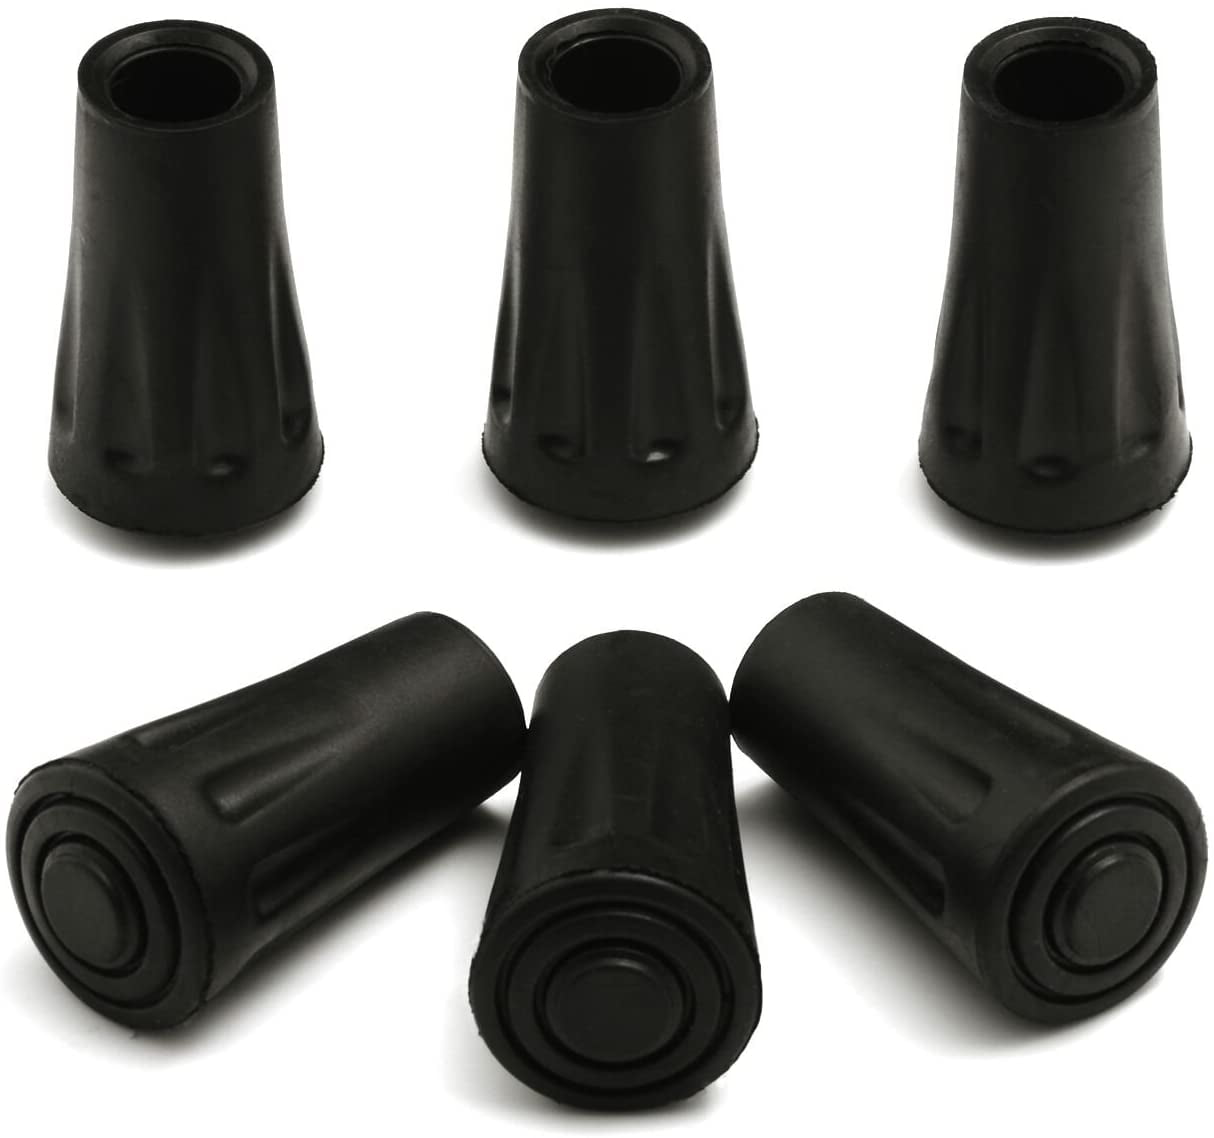 Alpenstock Rubber Head Cover 8pcs Replacement Walking Stick Rubber Tips Cylindrical Trekking Poles Caps Tips 